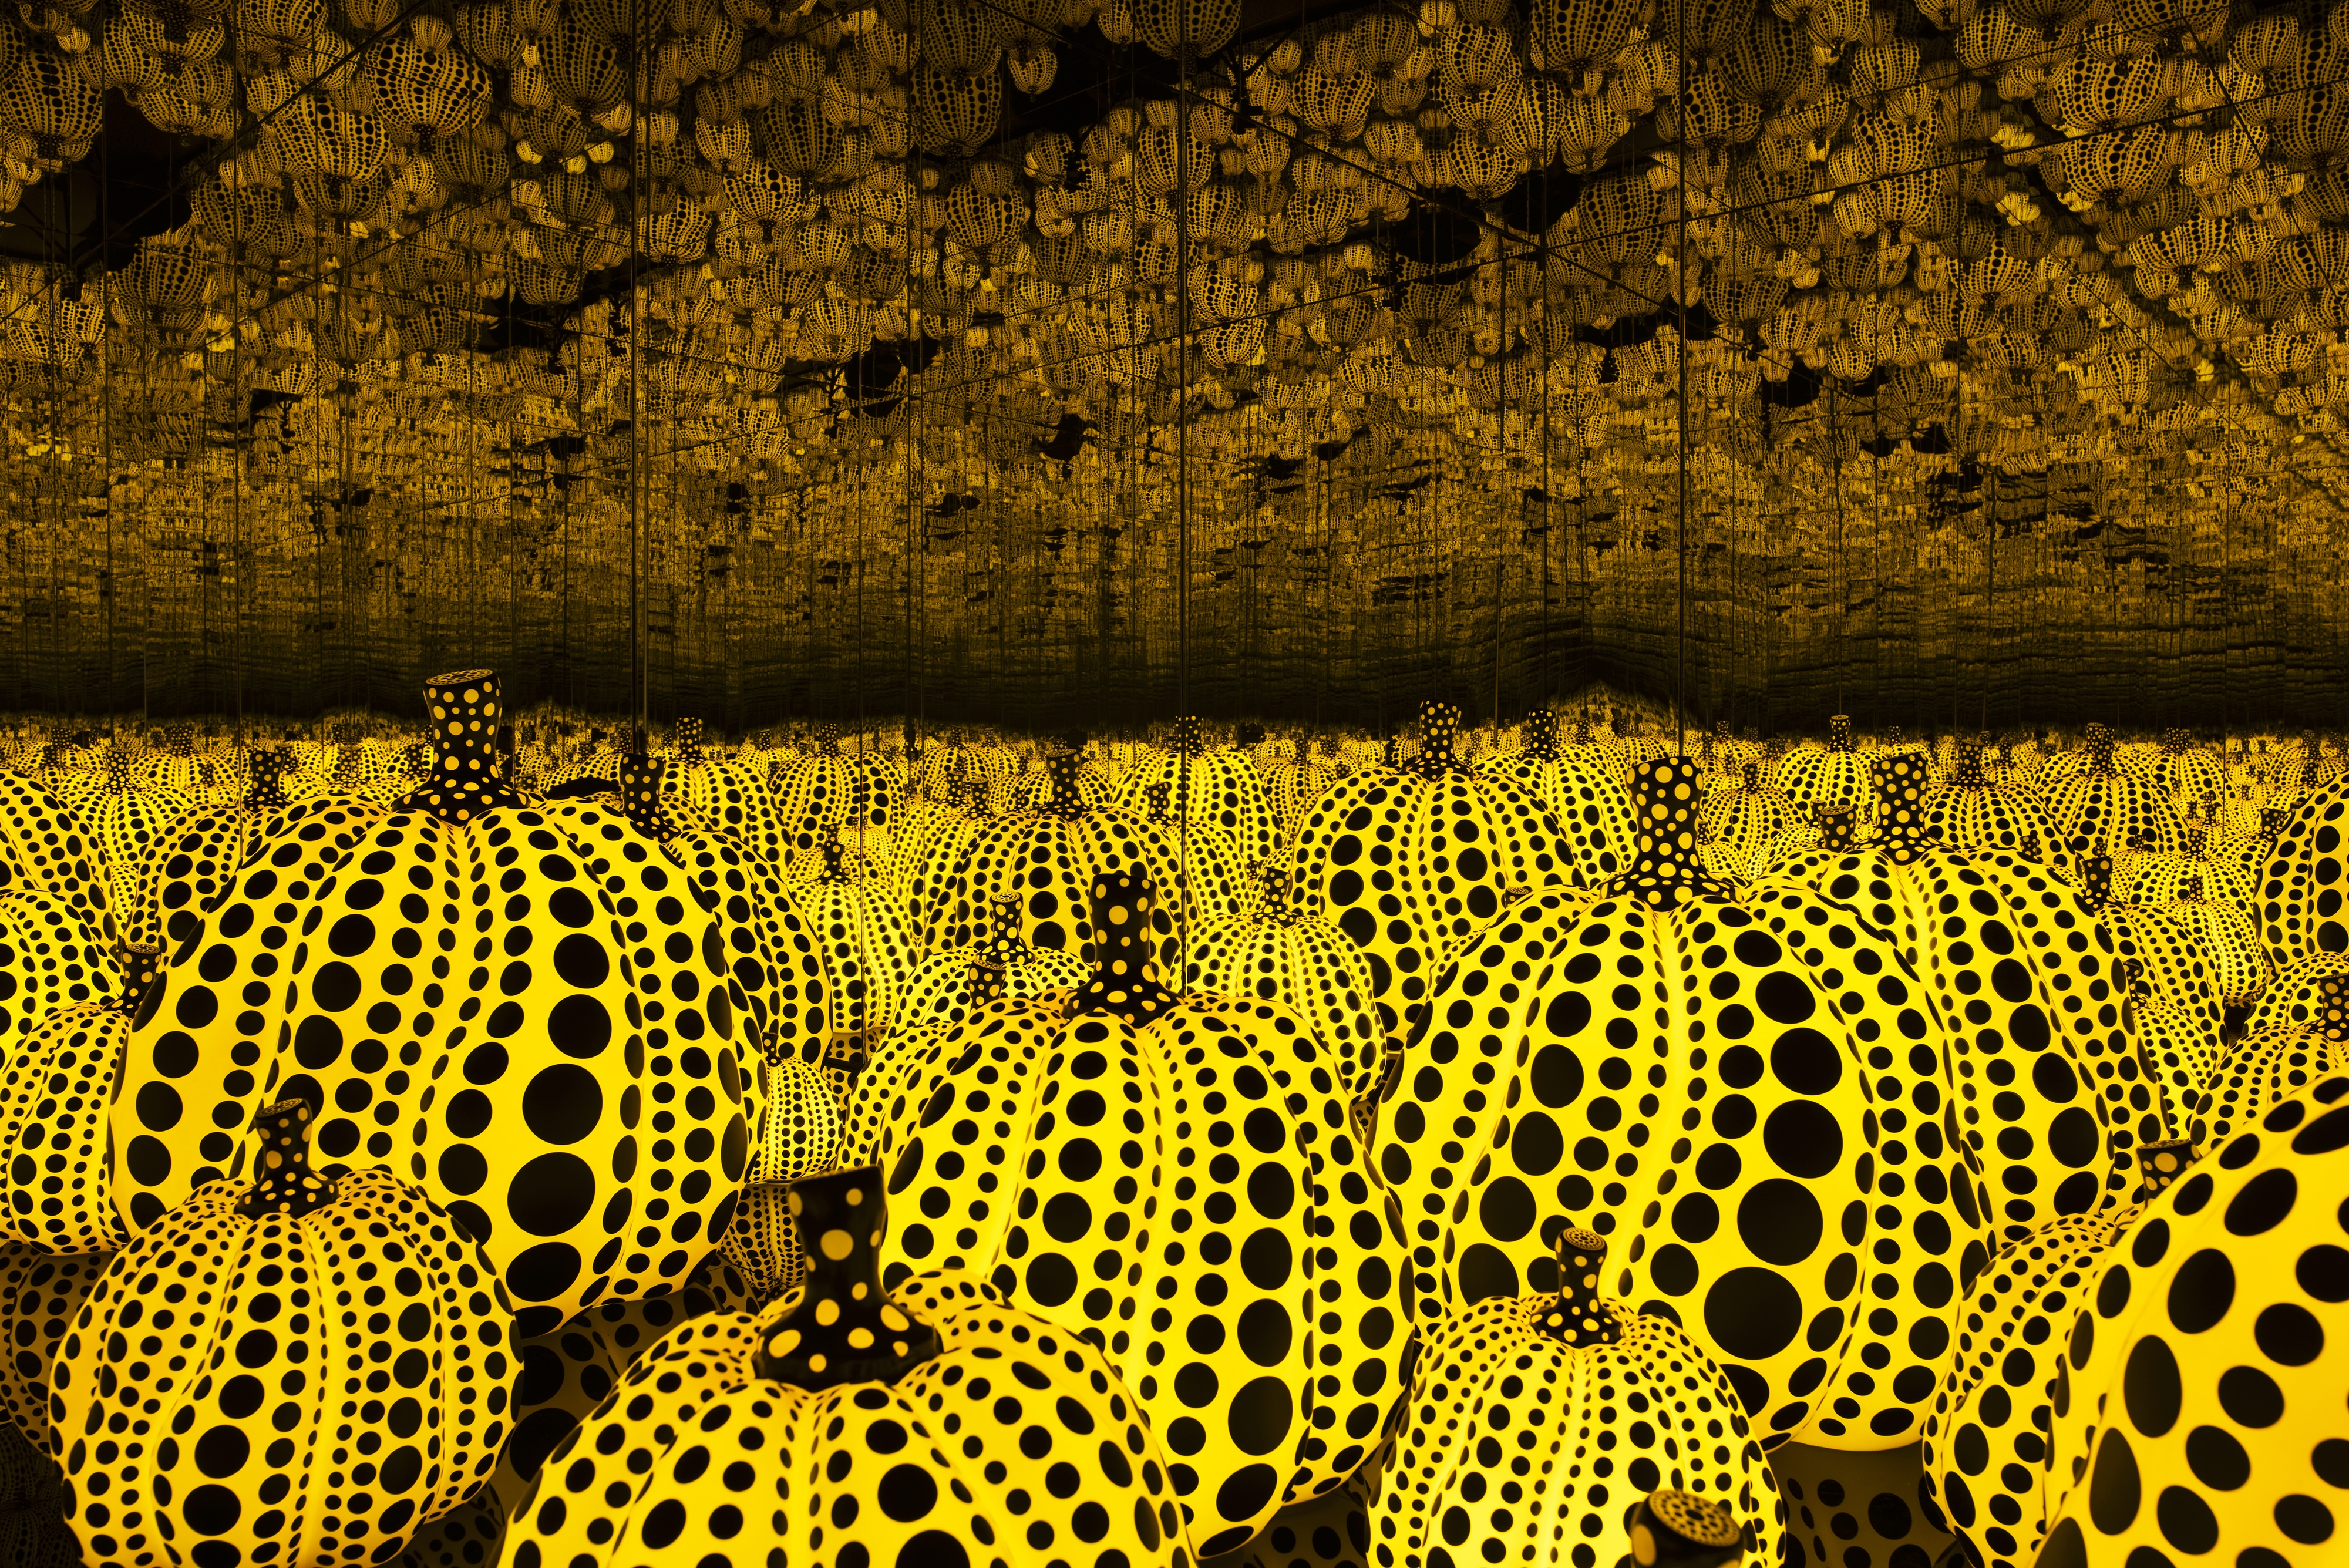 All the Eternal Love I Have for the Pumpkins, 2016 Installation, Yayoi Kusama 25 May – 30 July 2016 Victoria Miro, 16 Wharf Road, London, N1 7RW